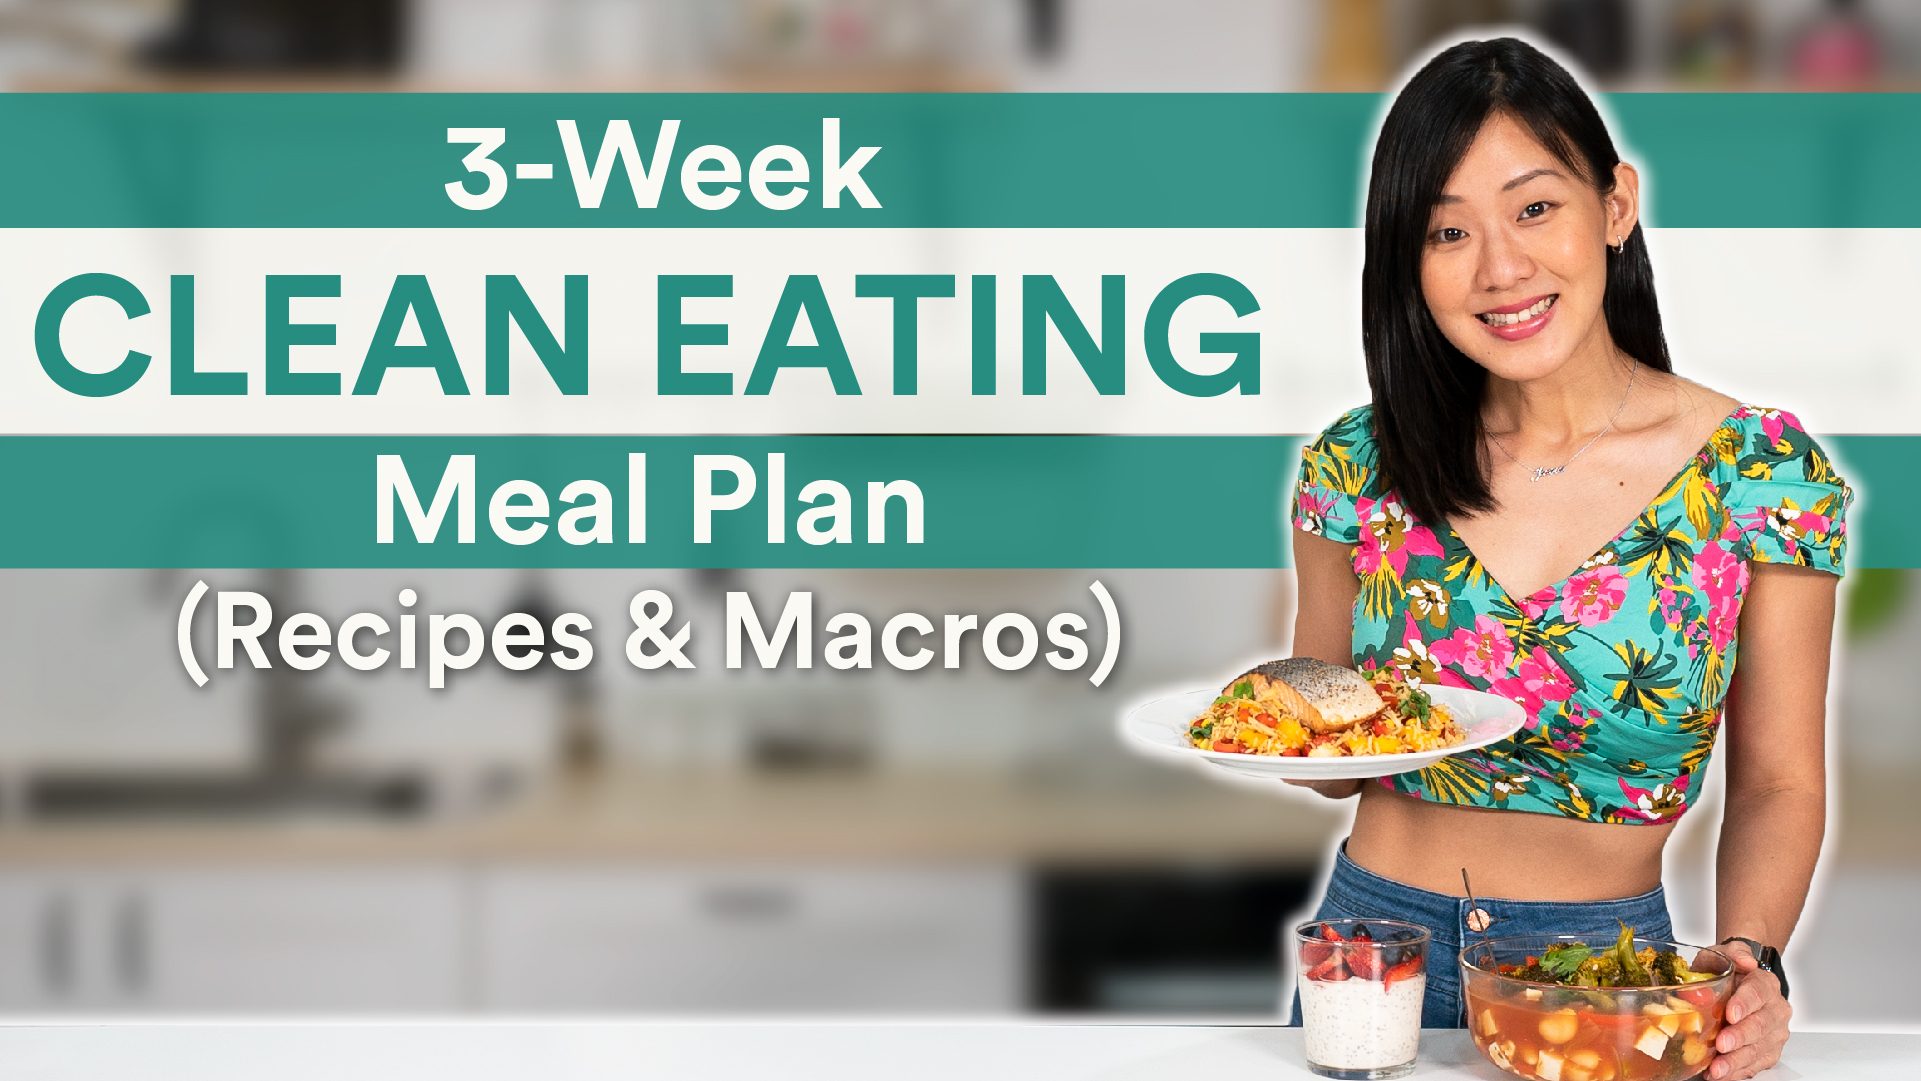 3 Week Clean Eating Meal Plan Full Recipes Marcos Included 3511